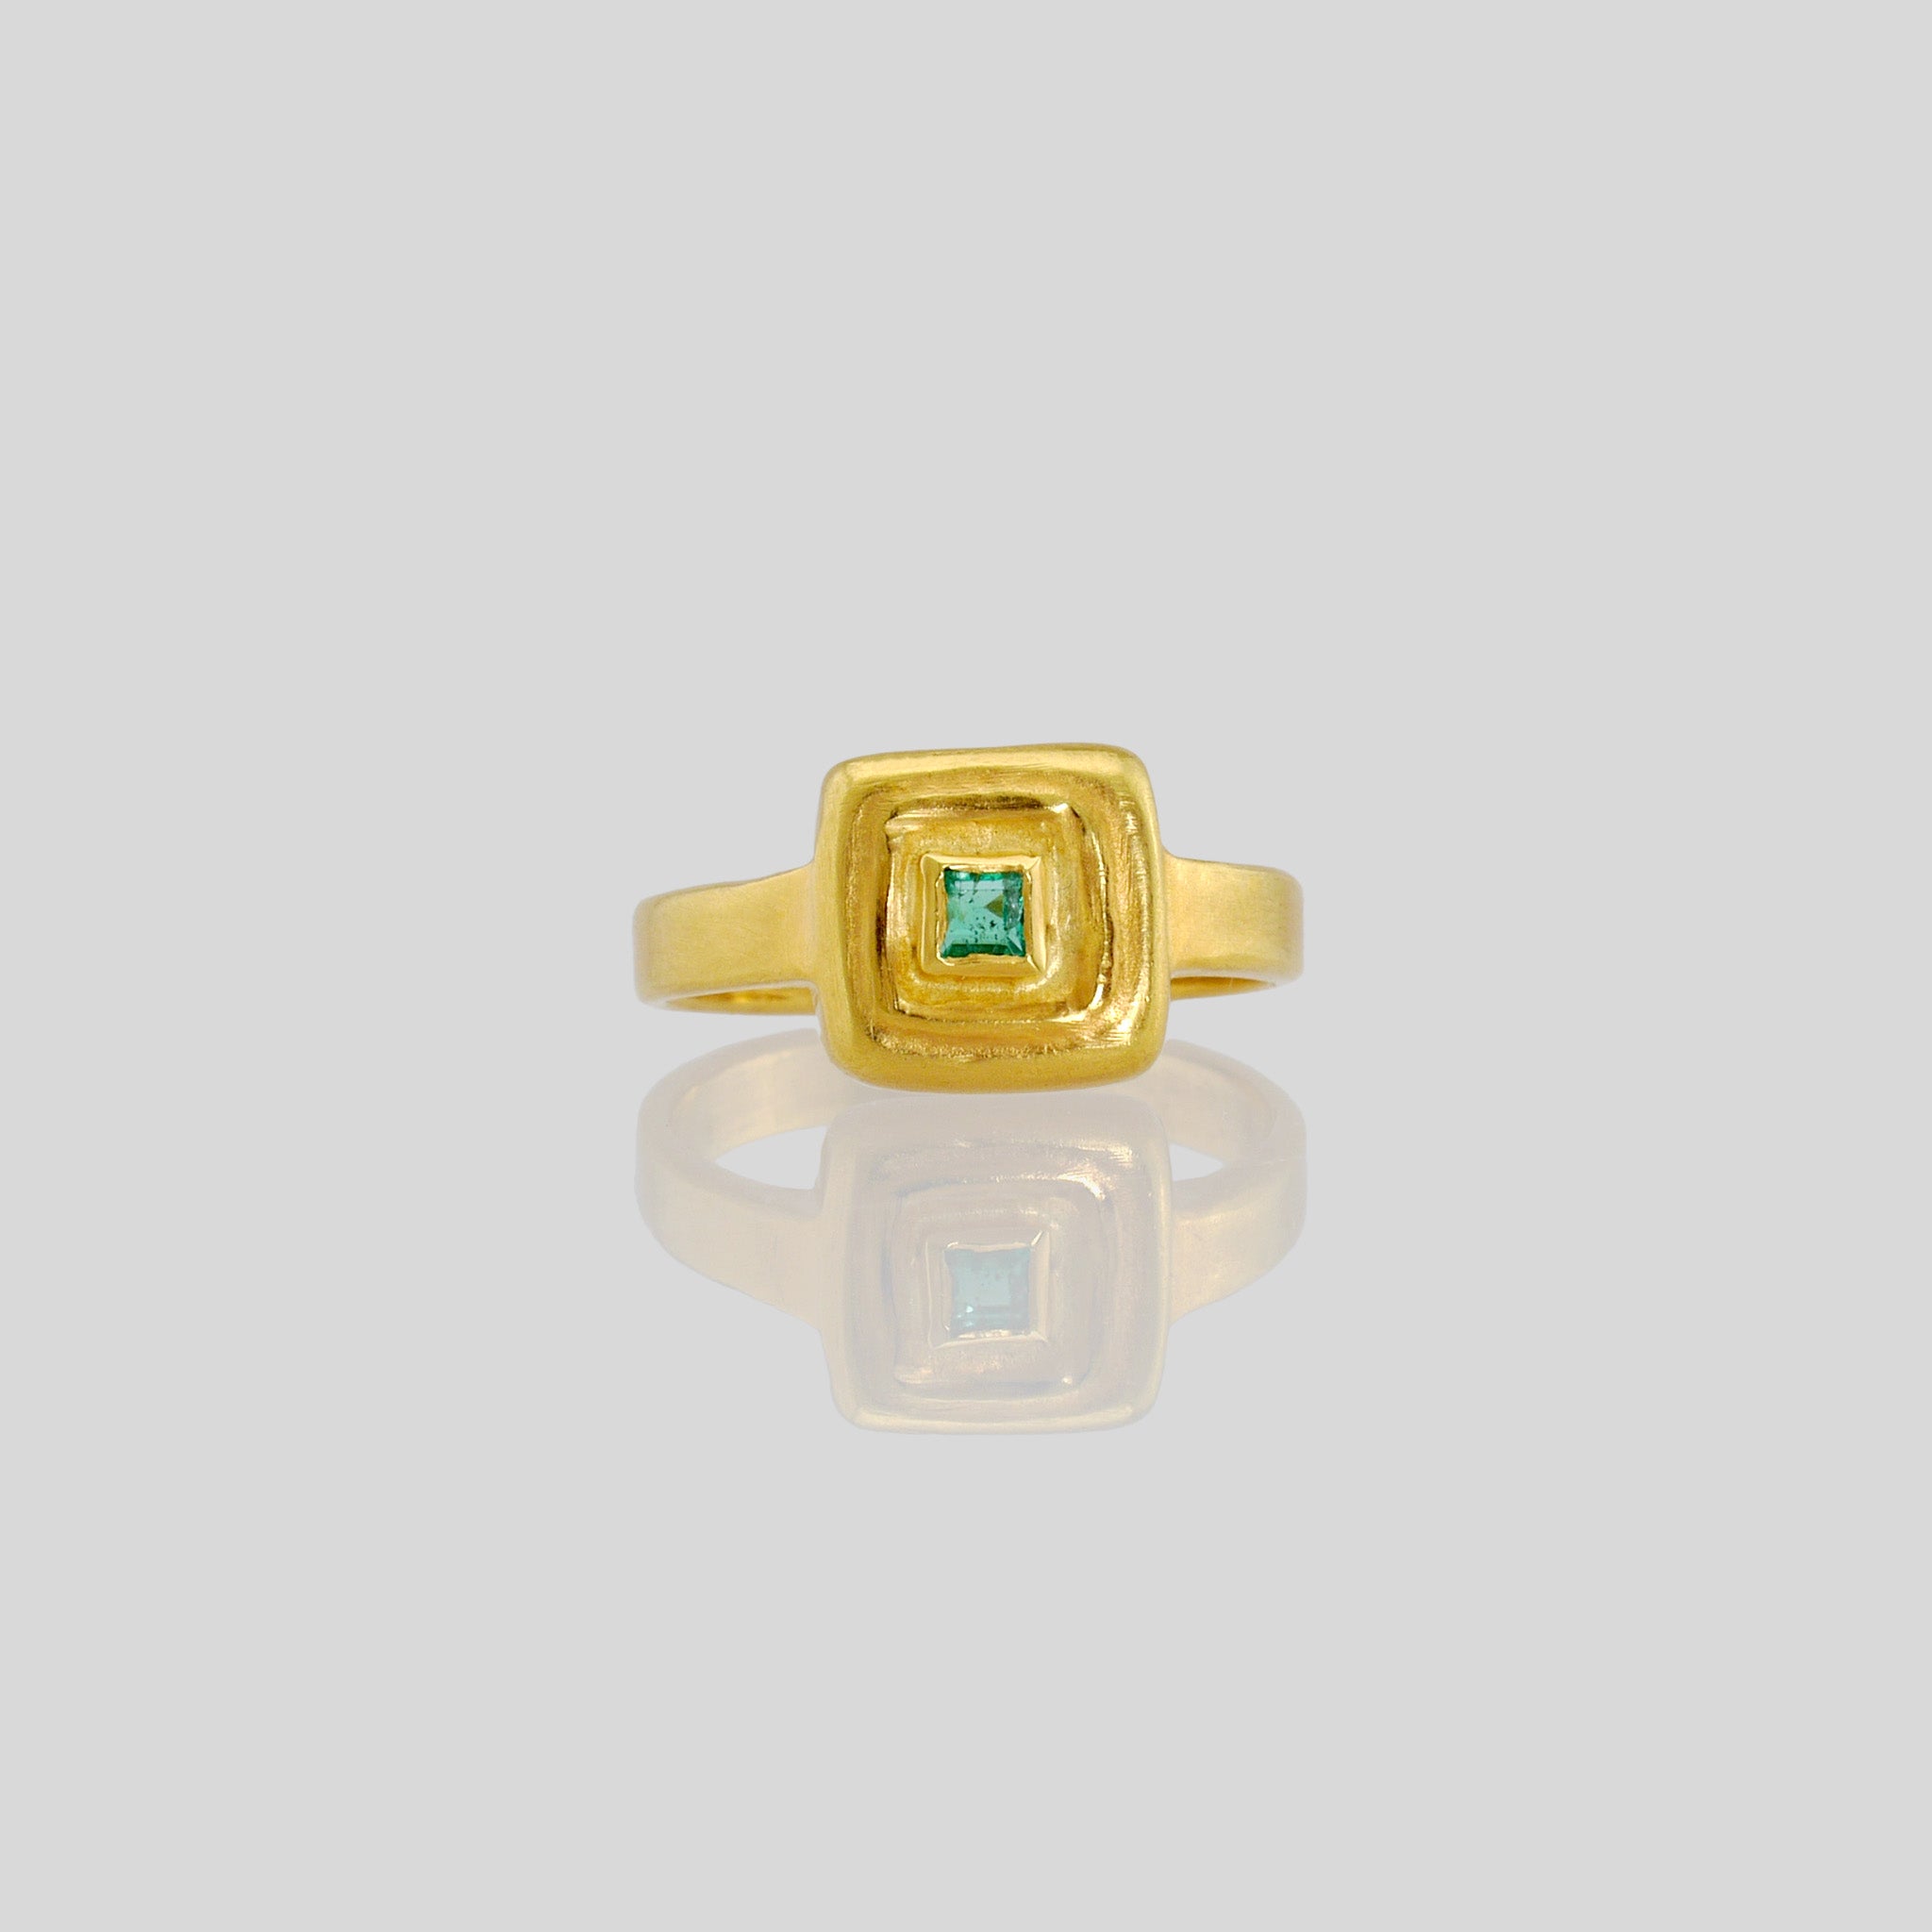 Front view of Handcrafted 18k Gold ring featuring a square Emerald set atop a square surface, evoking the ancient Egyptian era's golden jewelry of the Pharaohs.